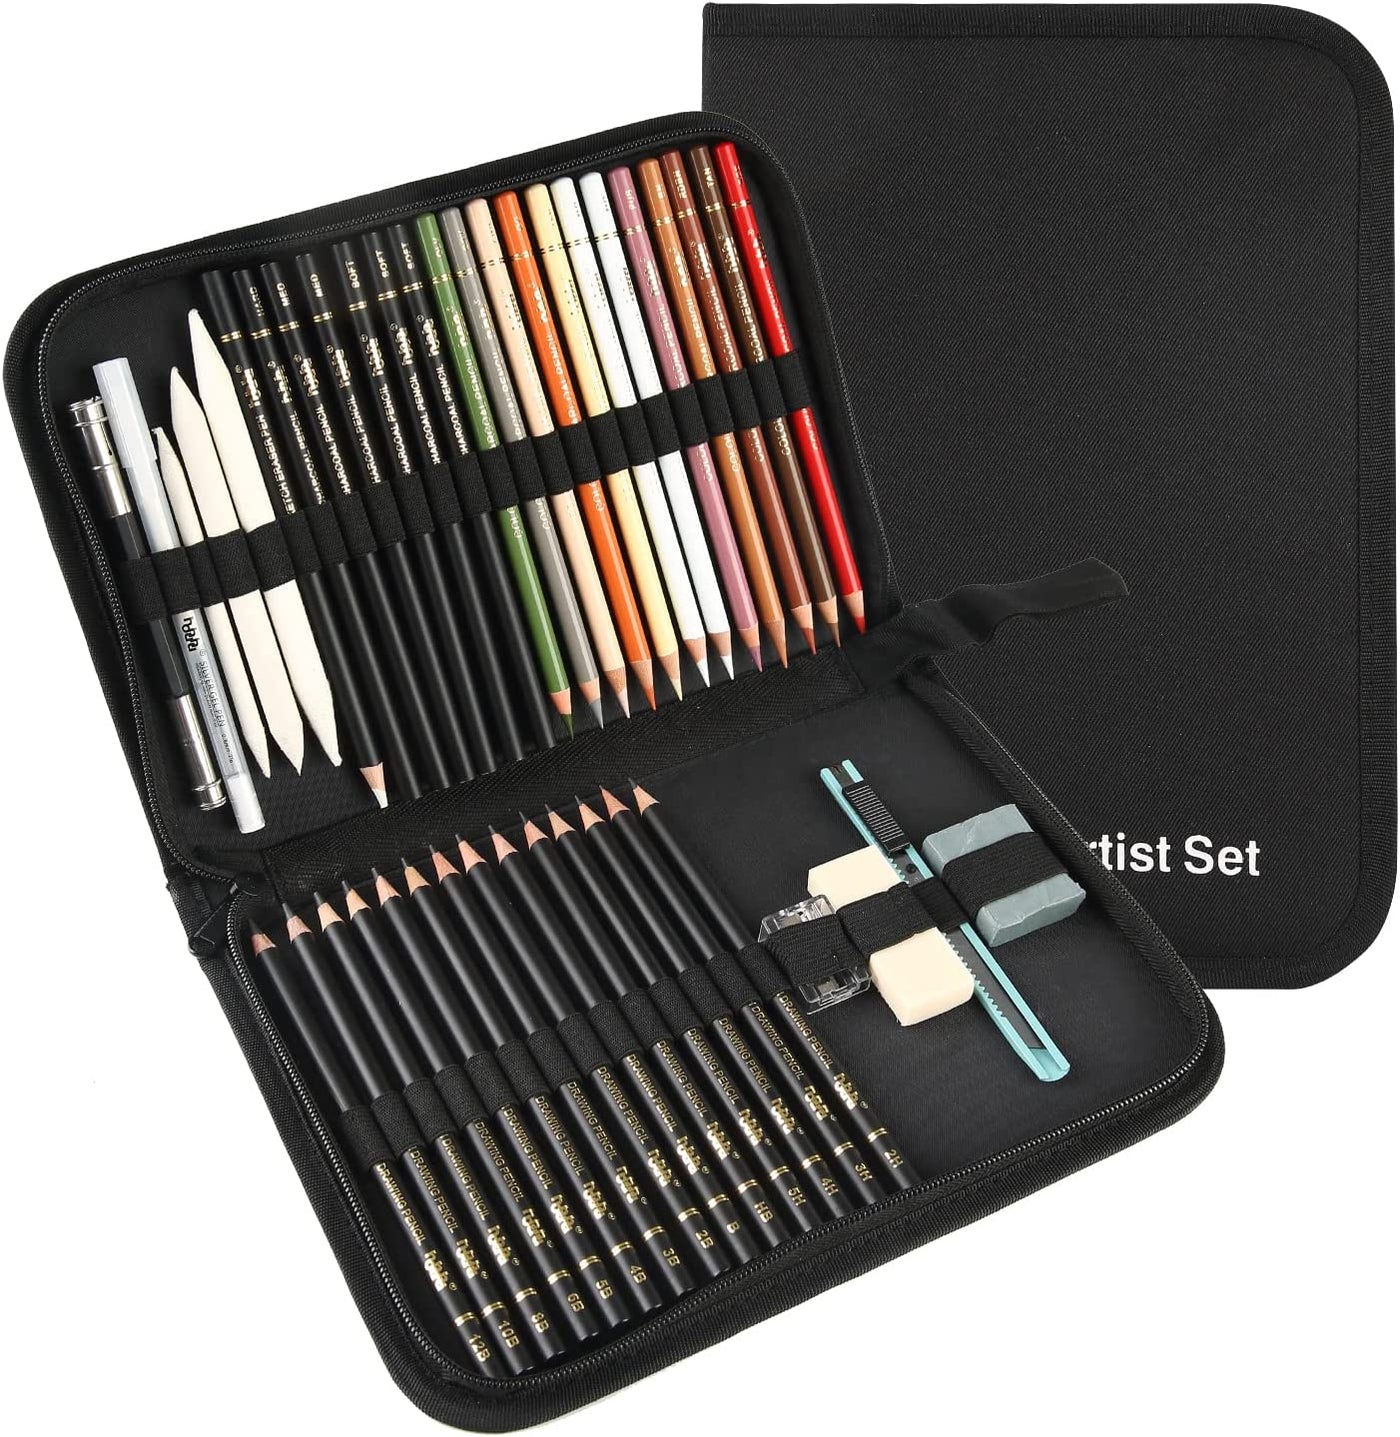 Typecho Sketching Drawing Art Set,58pcs Professional Wooden Artist Kit with  Sketchbook,Complete Sketching,Charcoal Pencils and Tools,Ideal for